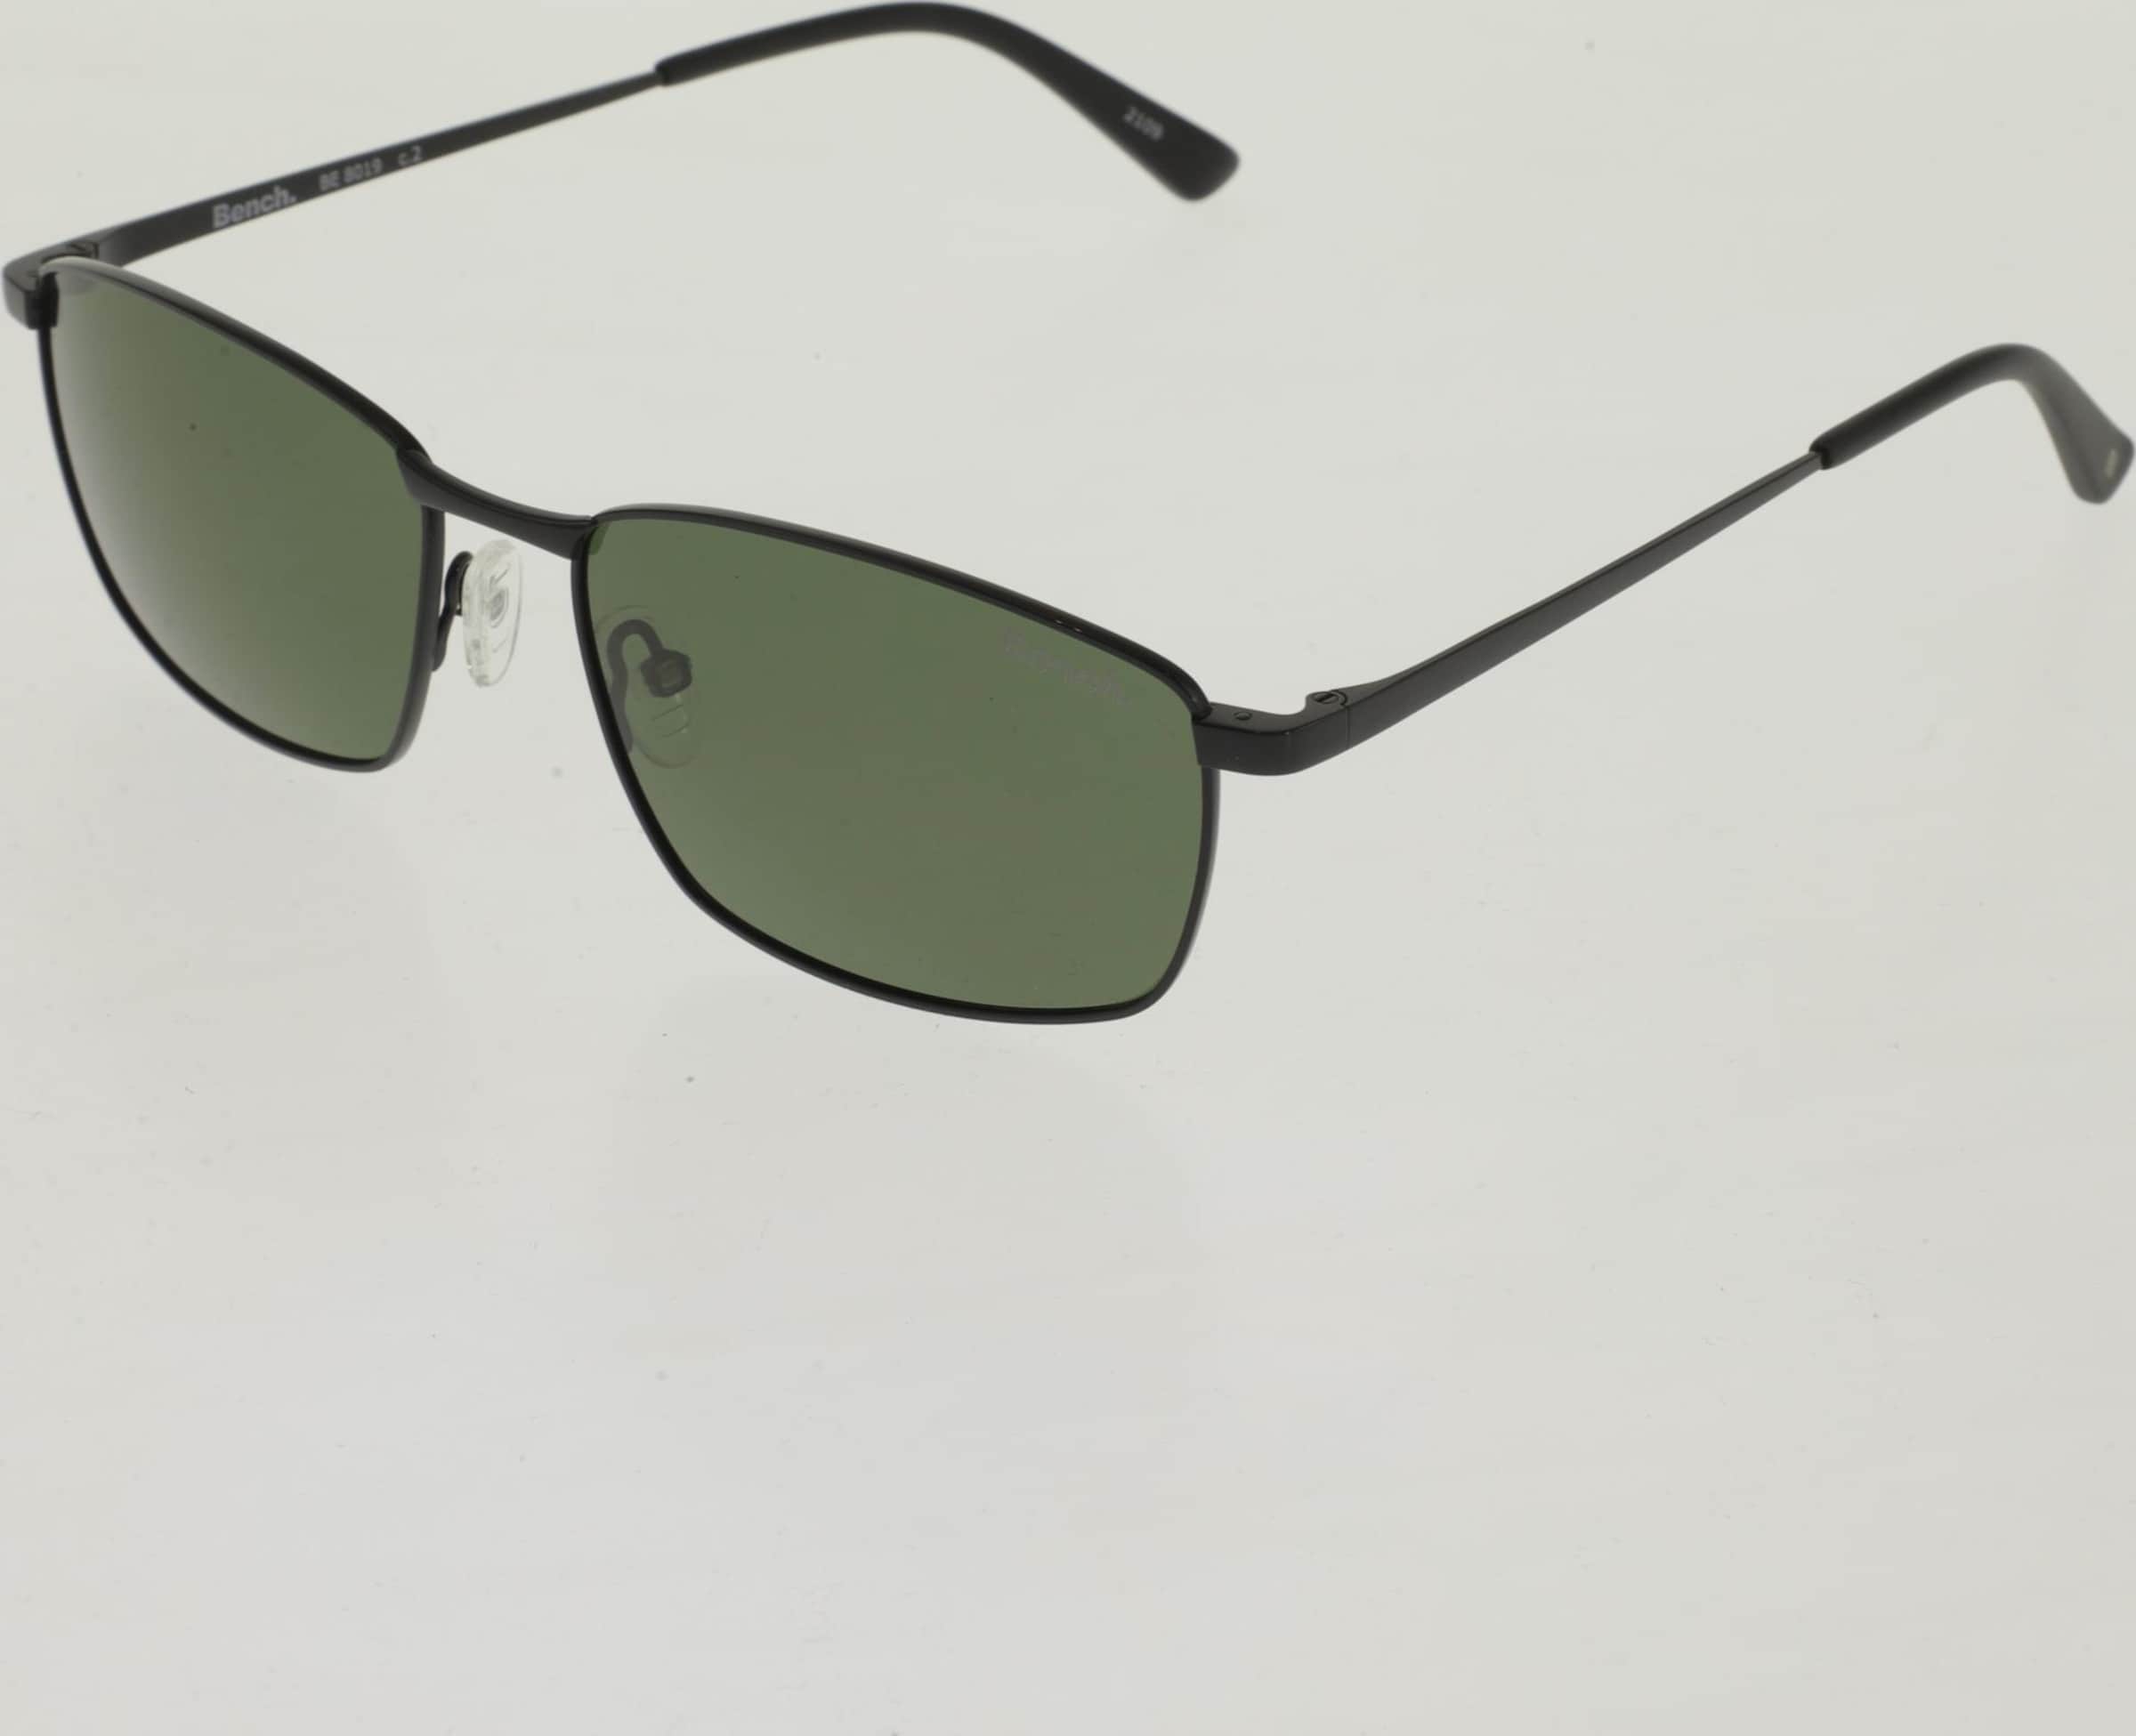 BENCH Sunglasses in One size in Black | ABOUT YOU